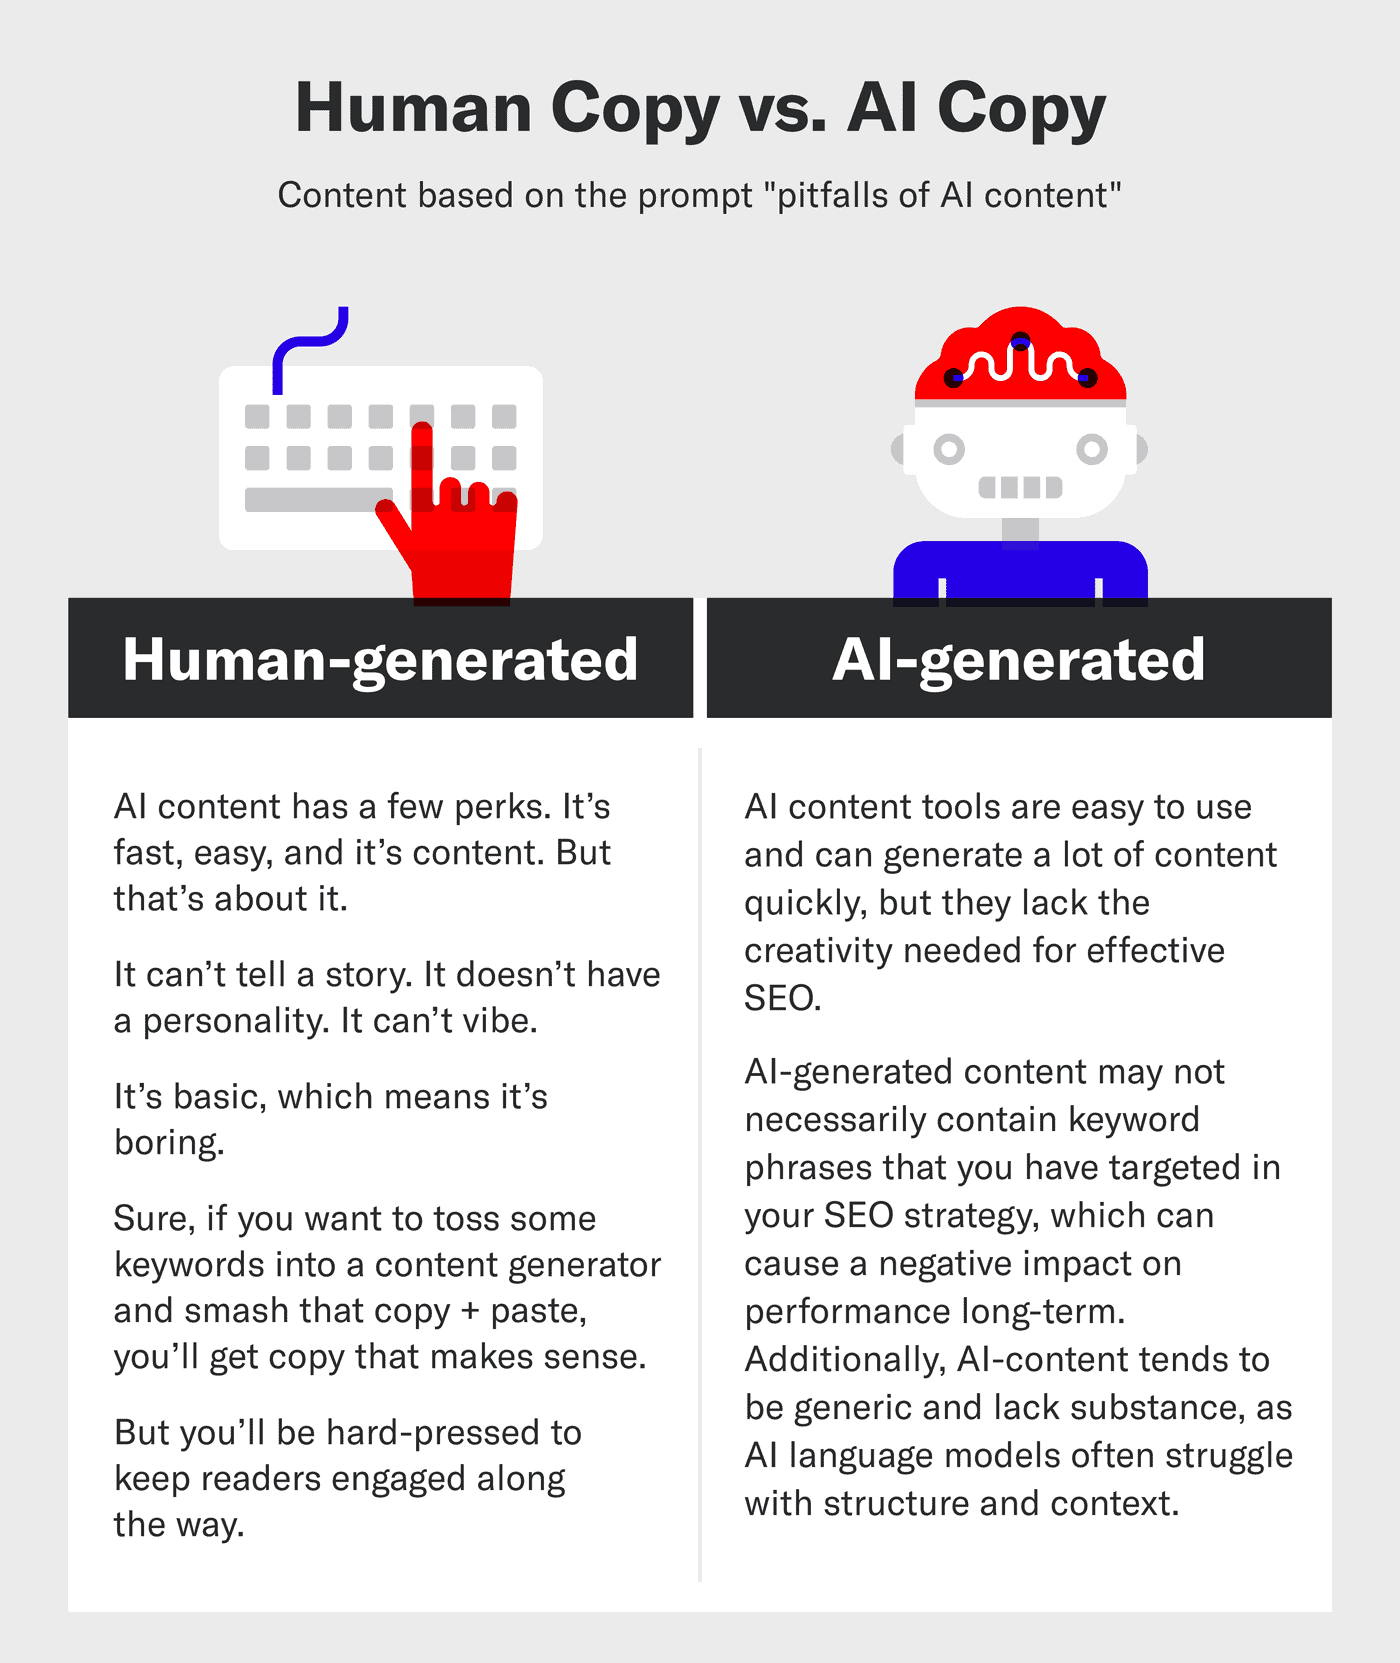 An image comparing the differences between human-generated copy and ai-generated copy